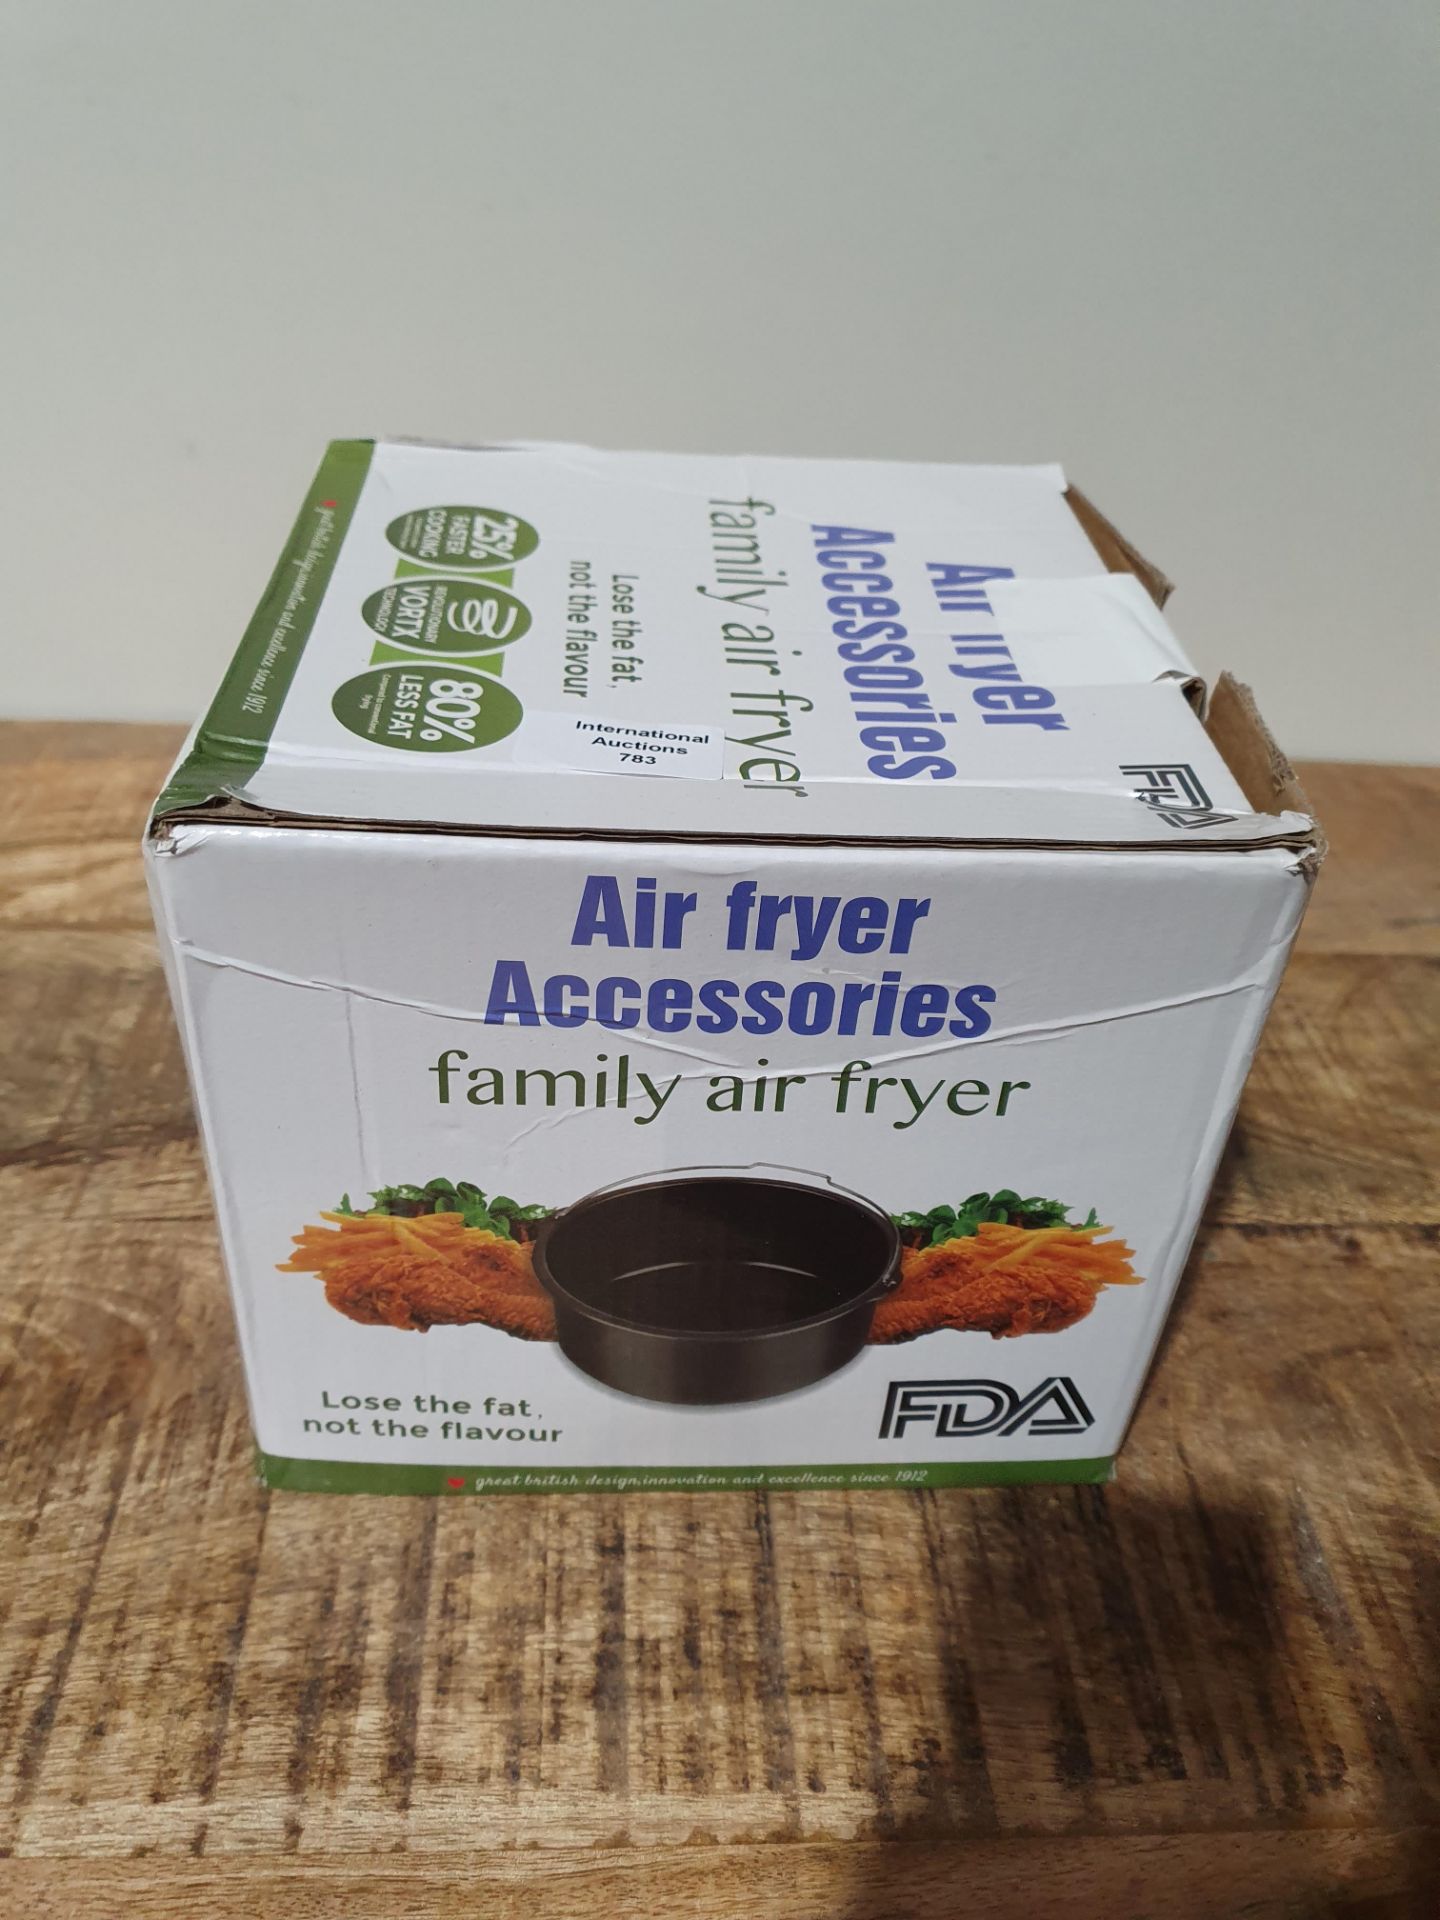 AIR FRYER ACCESSORIESCondition ReportAppraisal Available on Request - All Items are Unchecked/